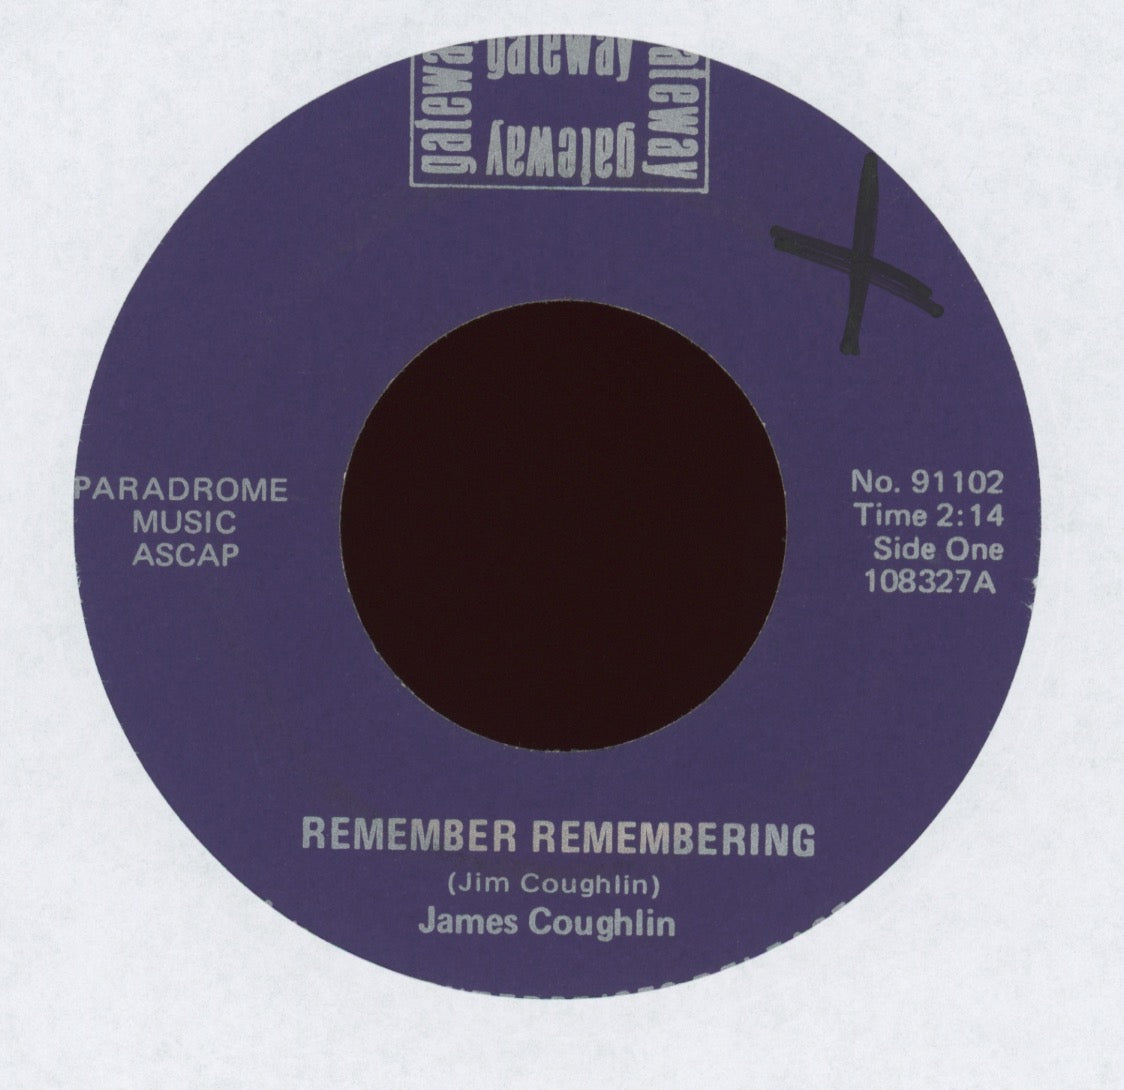 James Coughlin - Remember Remembering on Gateway Psych